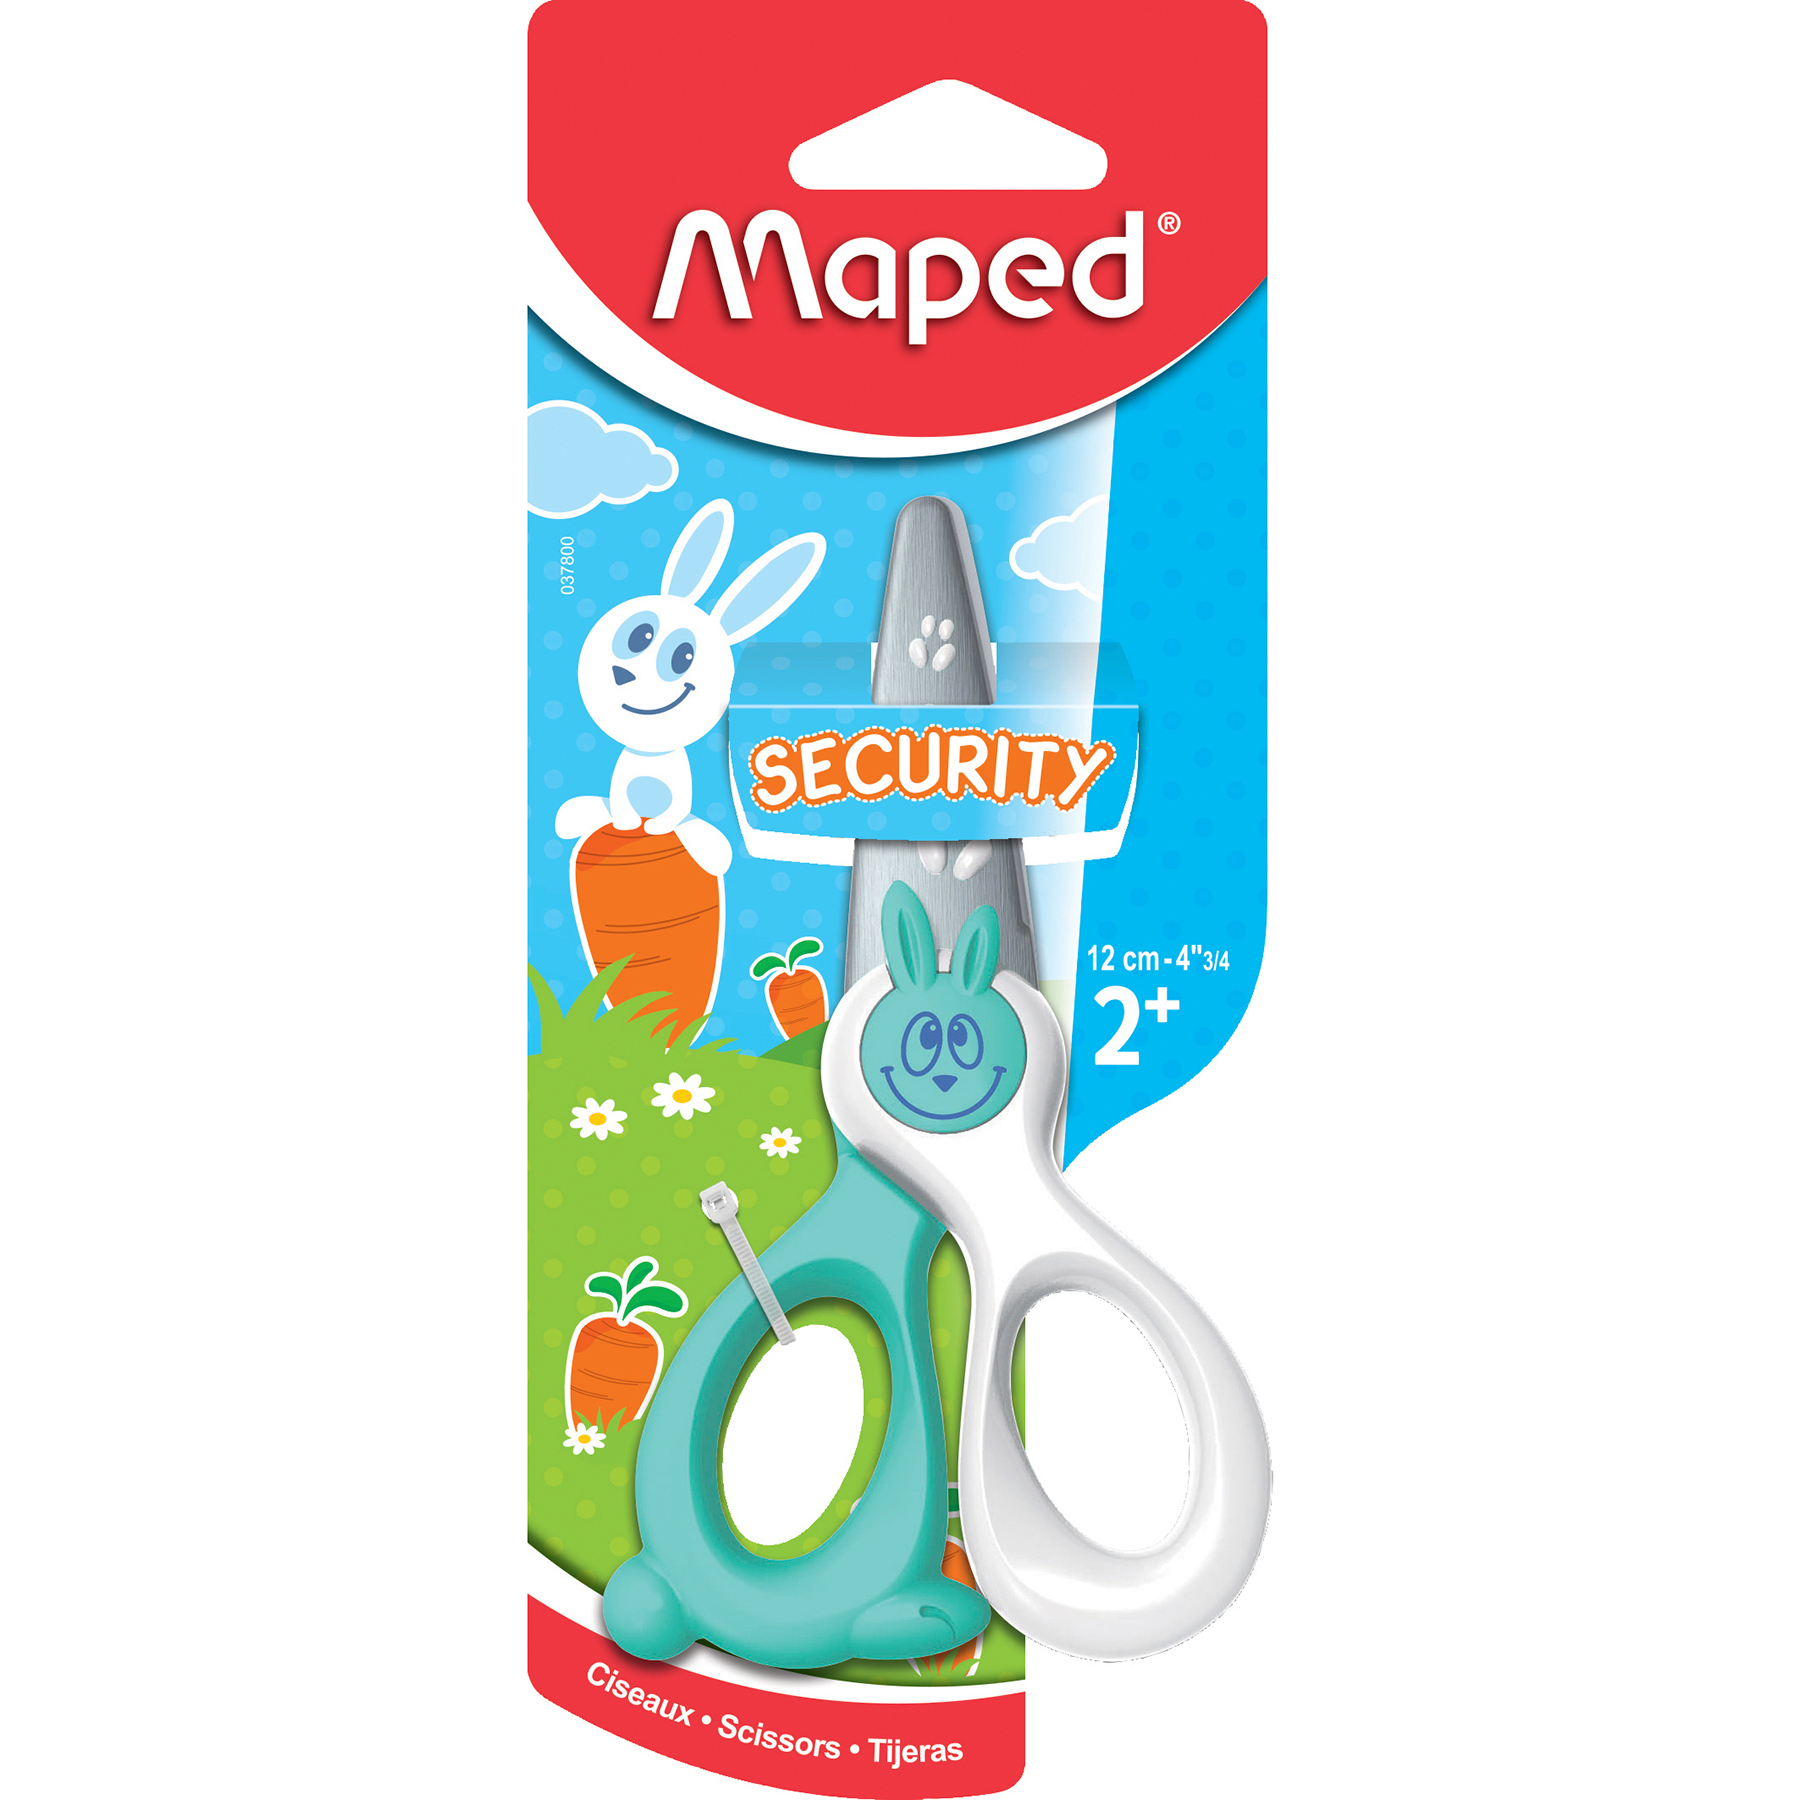 Kidicut Safety Scissors for Toddlers